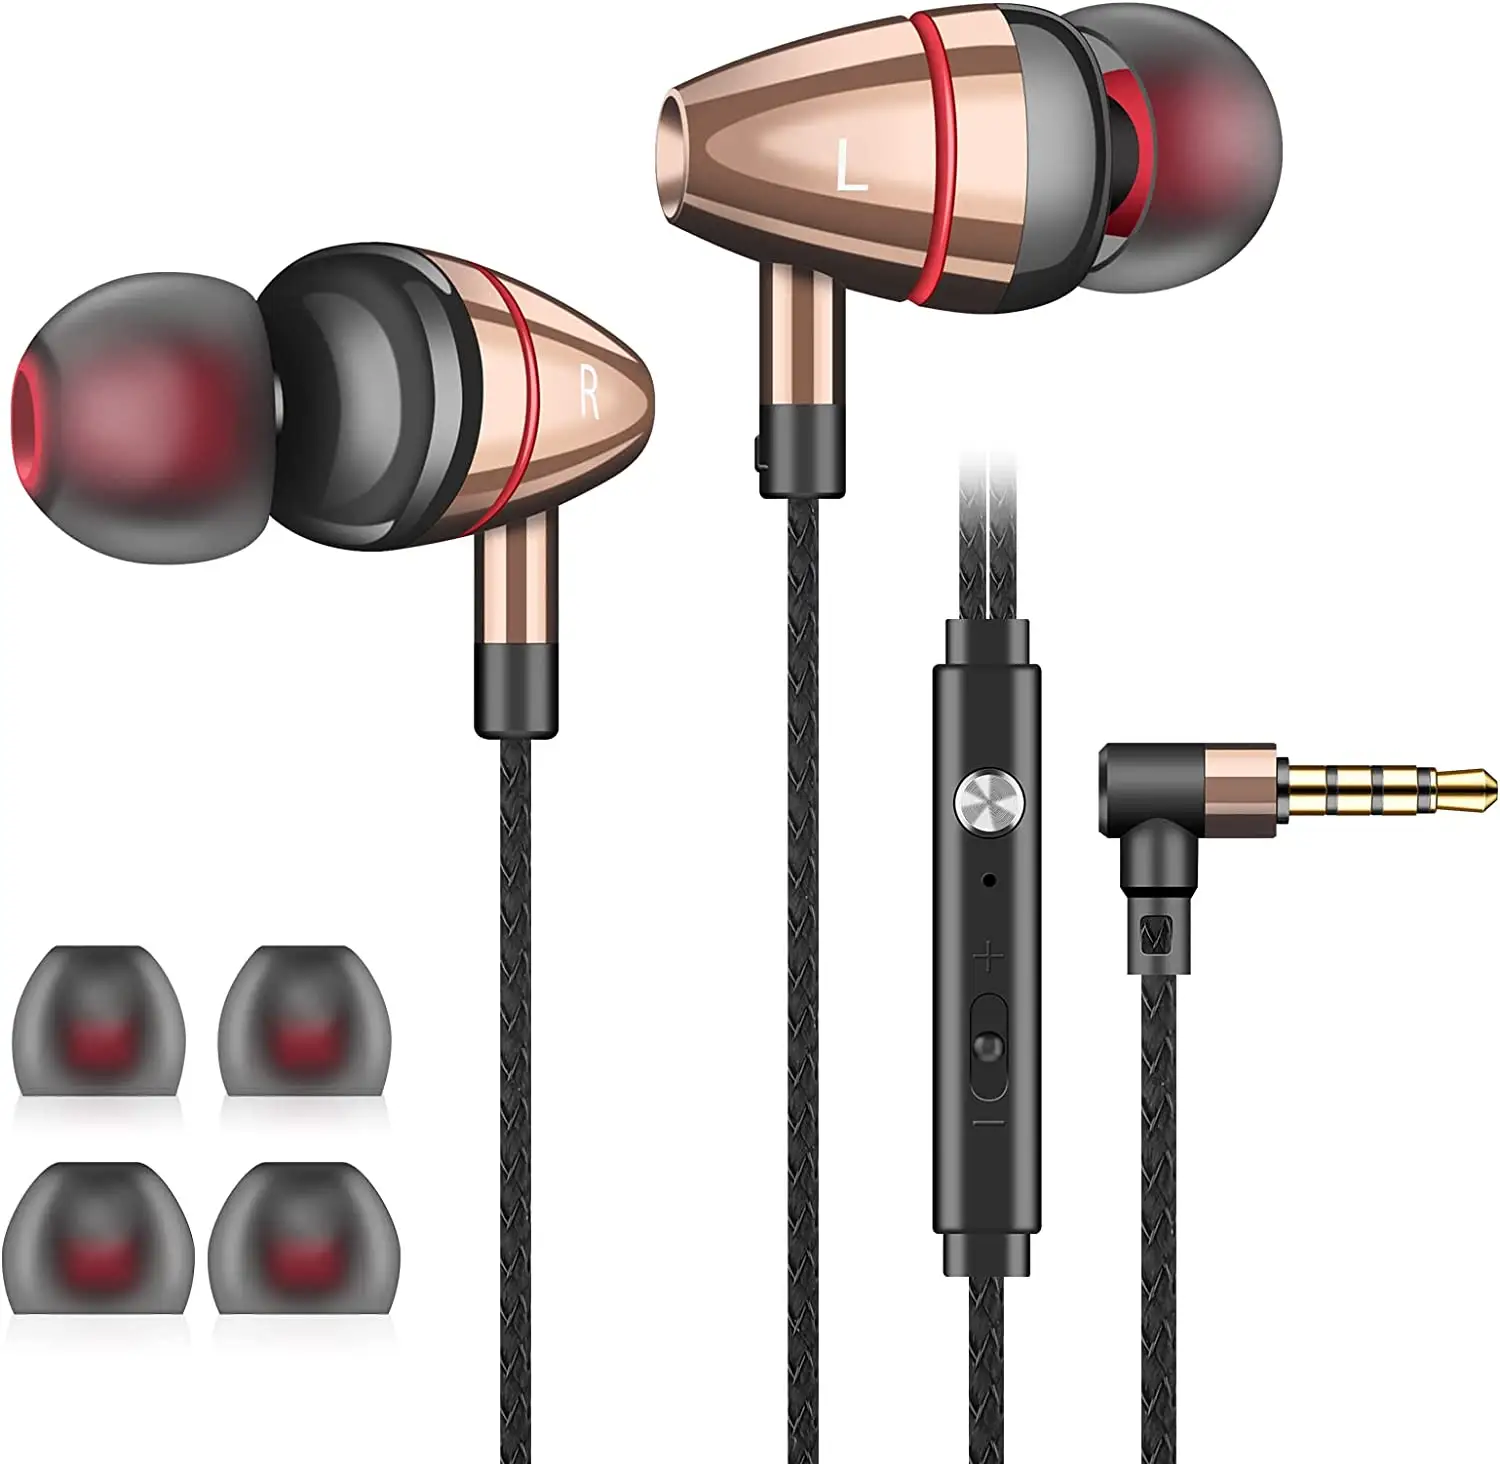 3.5mm Headphone Earphone Hi-Fi Stereo Headphone Noise Cancelling Wired Earbuds in-Ear Headset with Mic Volume Control